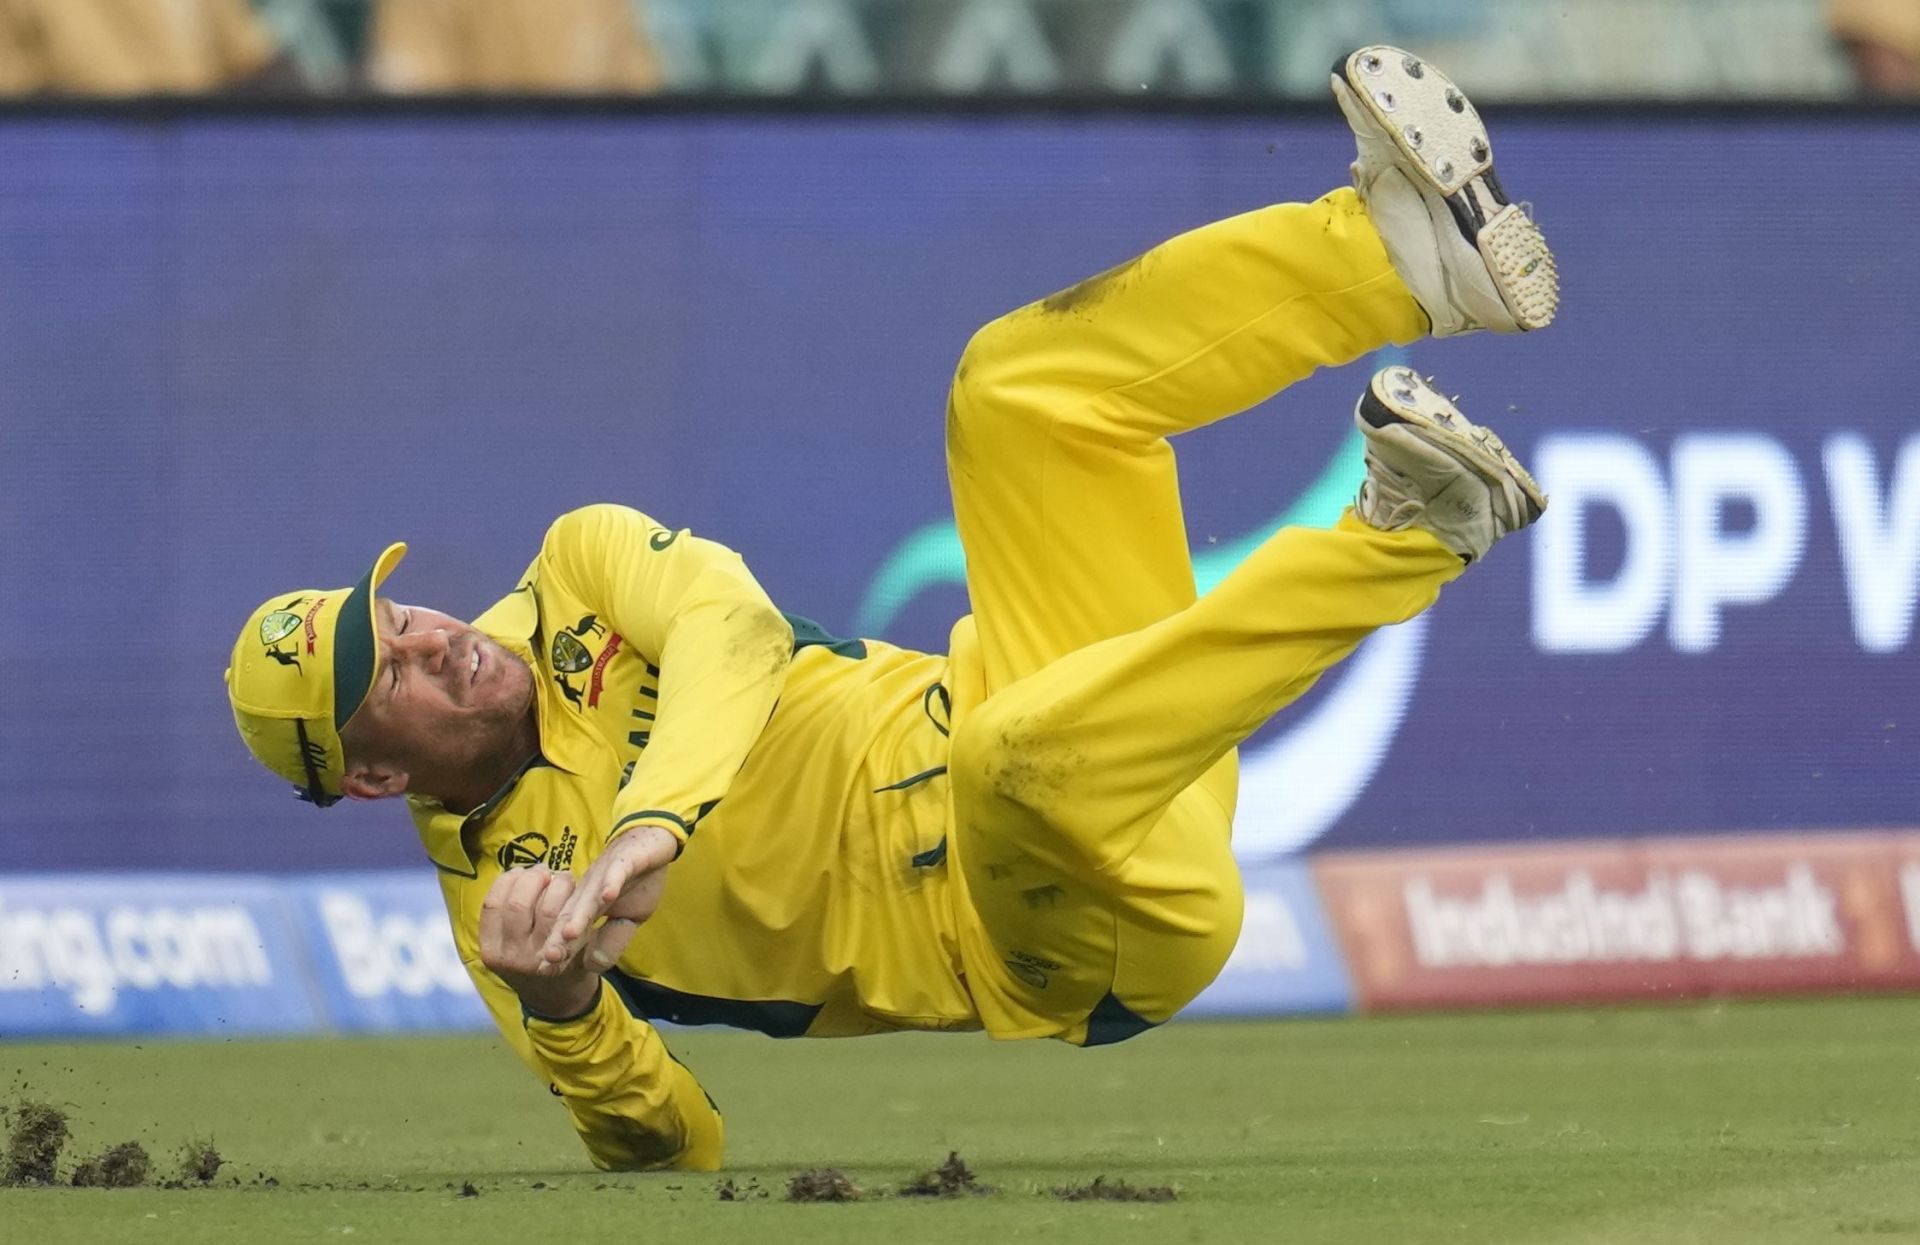 David Warner on the field for Australia this World Cup.